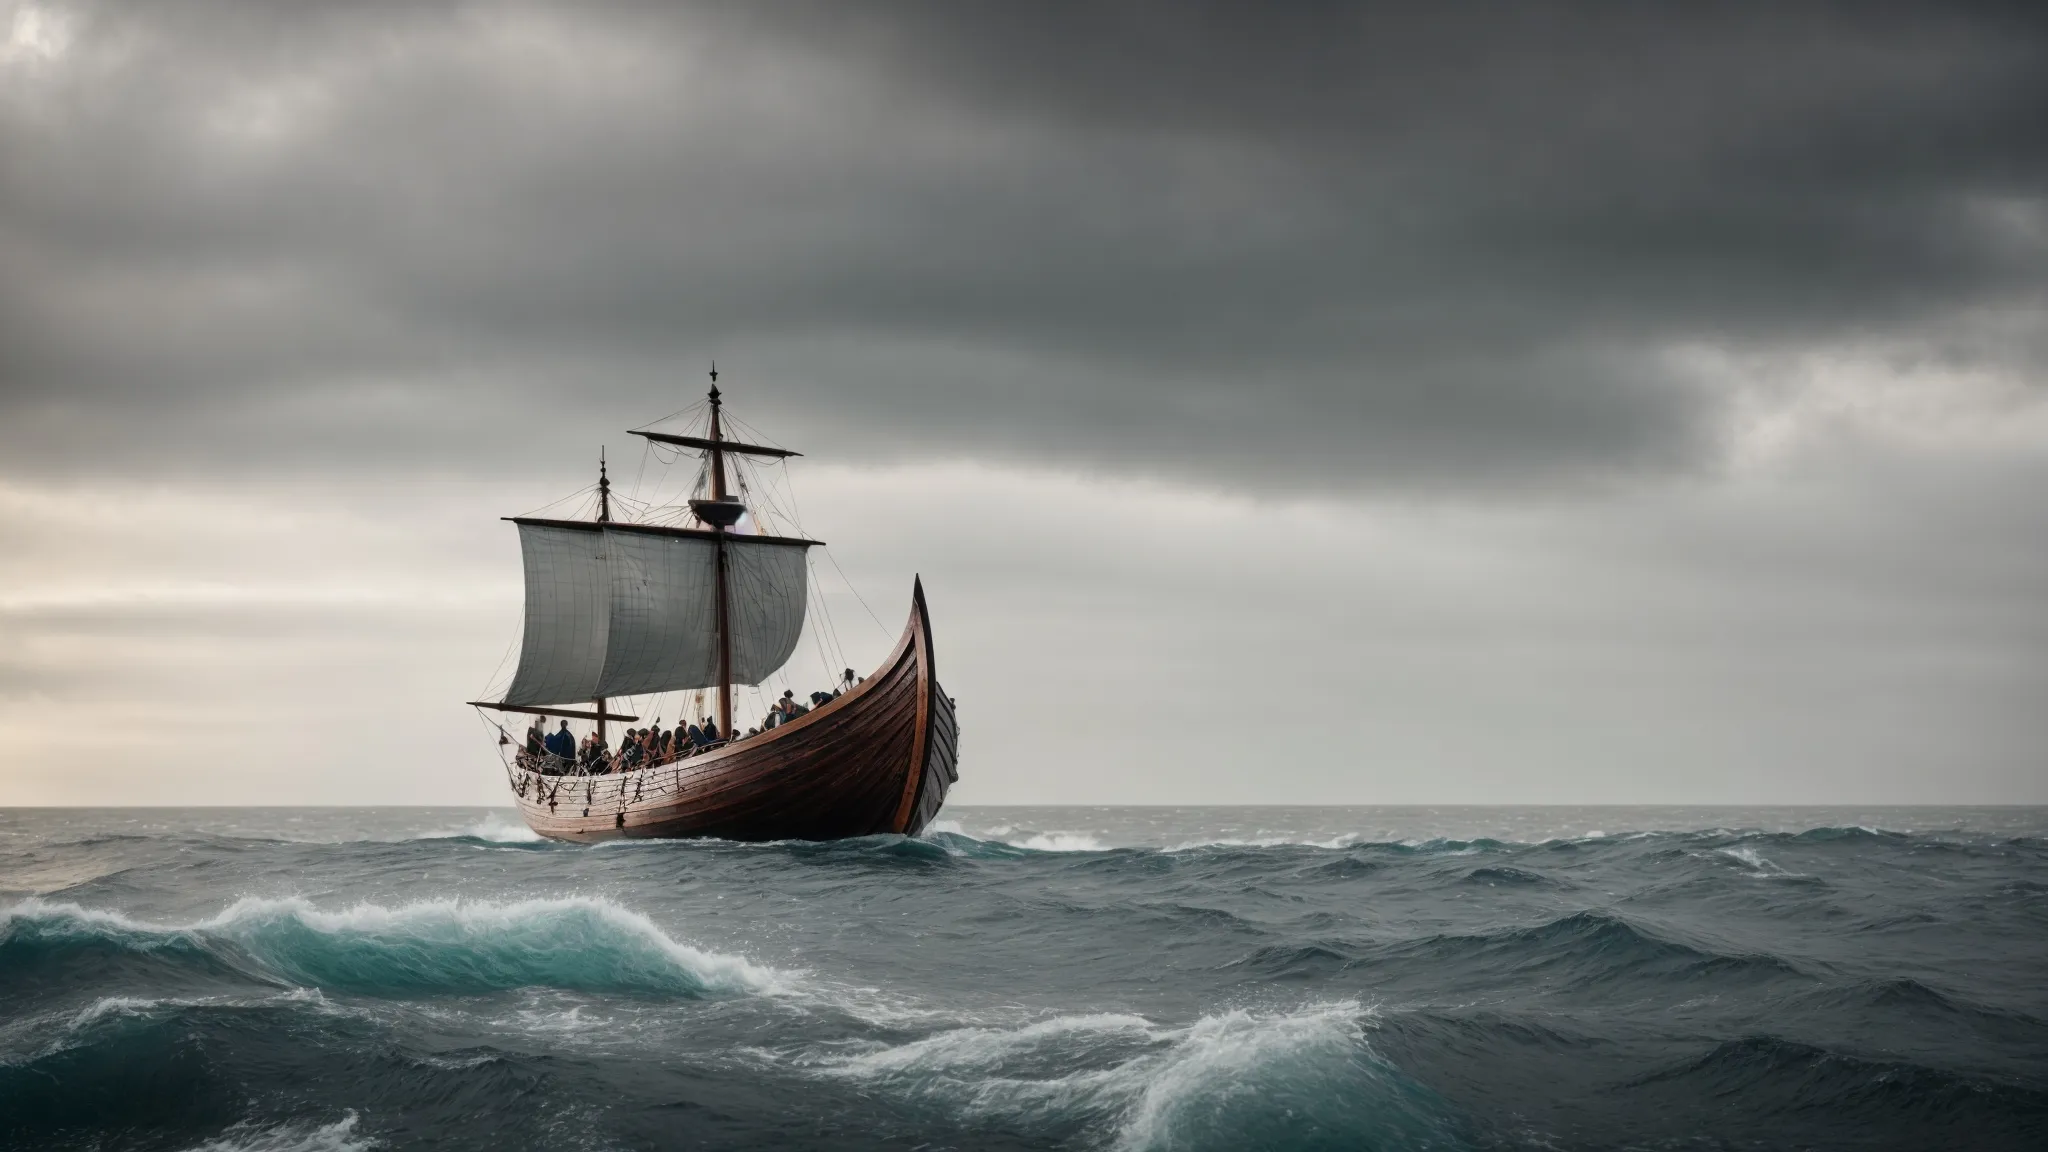 a viking ship, with a clear horizon ahead, guided by a compass, represents strategic navigation in digital waters.